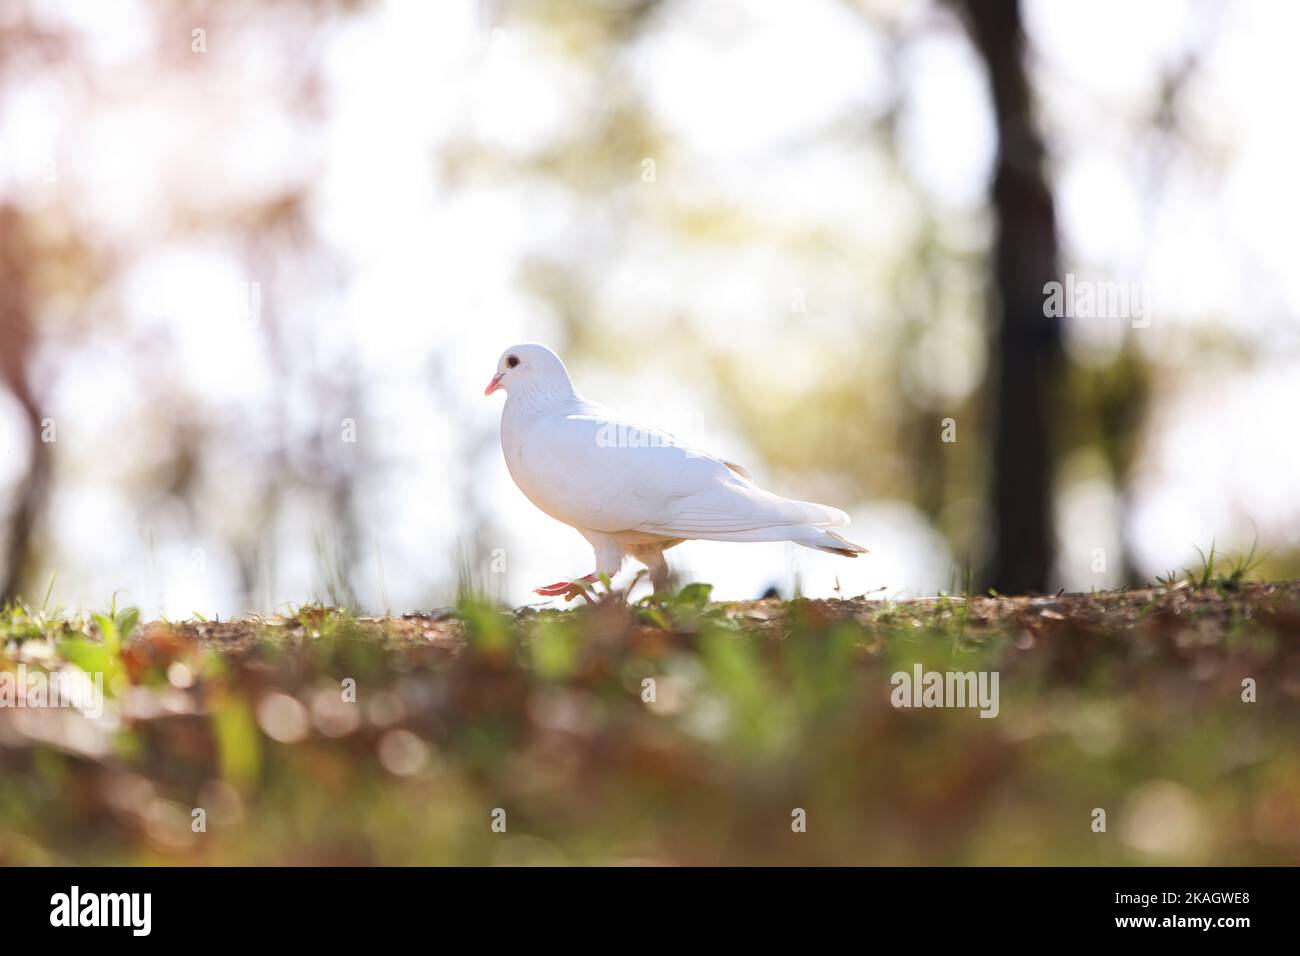 Beautiful white dove symbolizing hope, peace and freedom and bright light background in a forest park Stock Photo